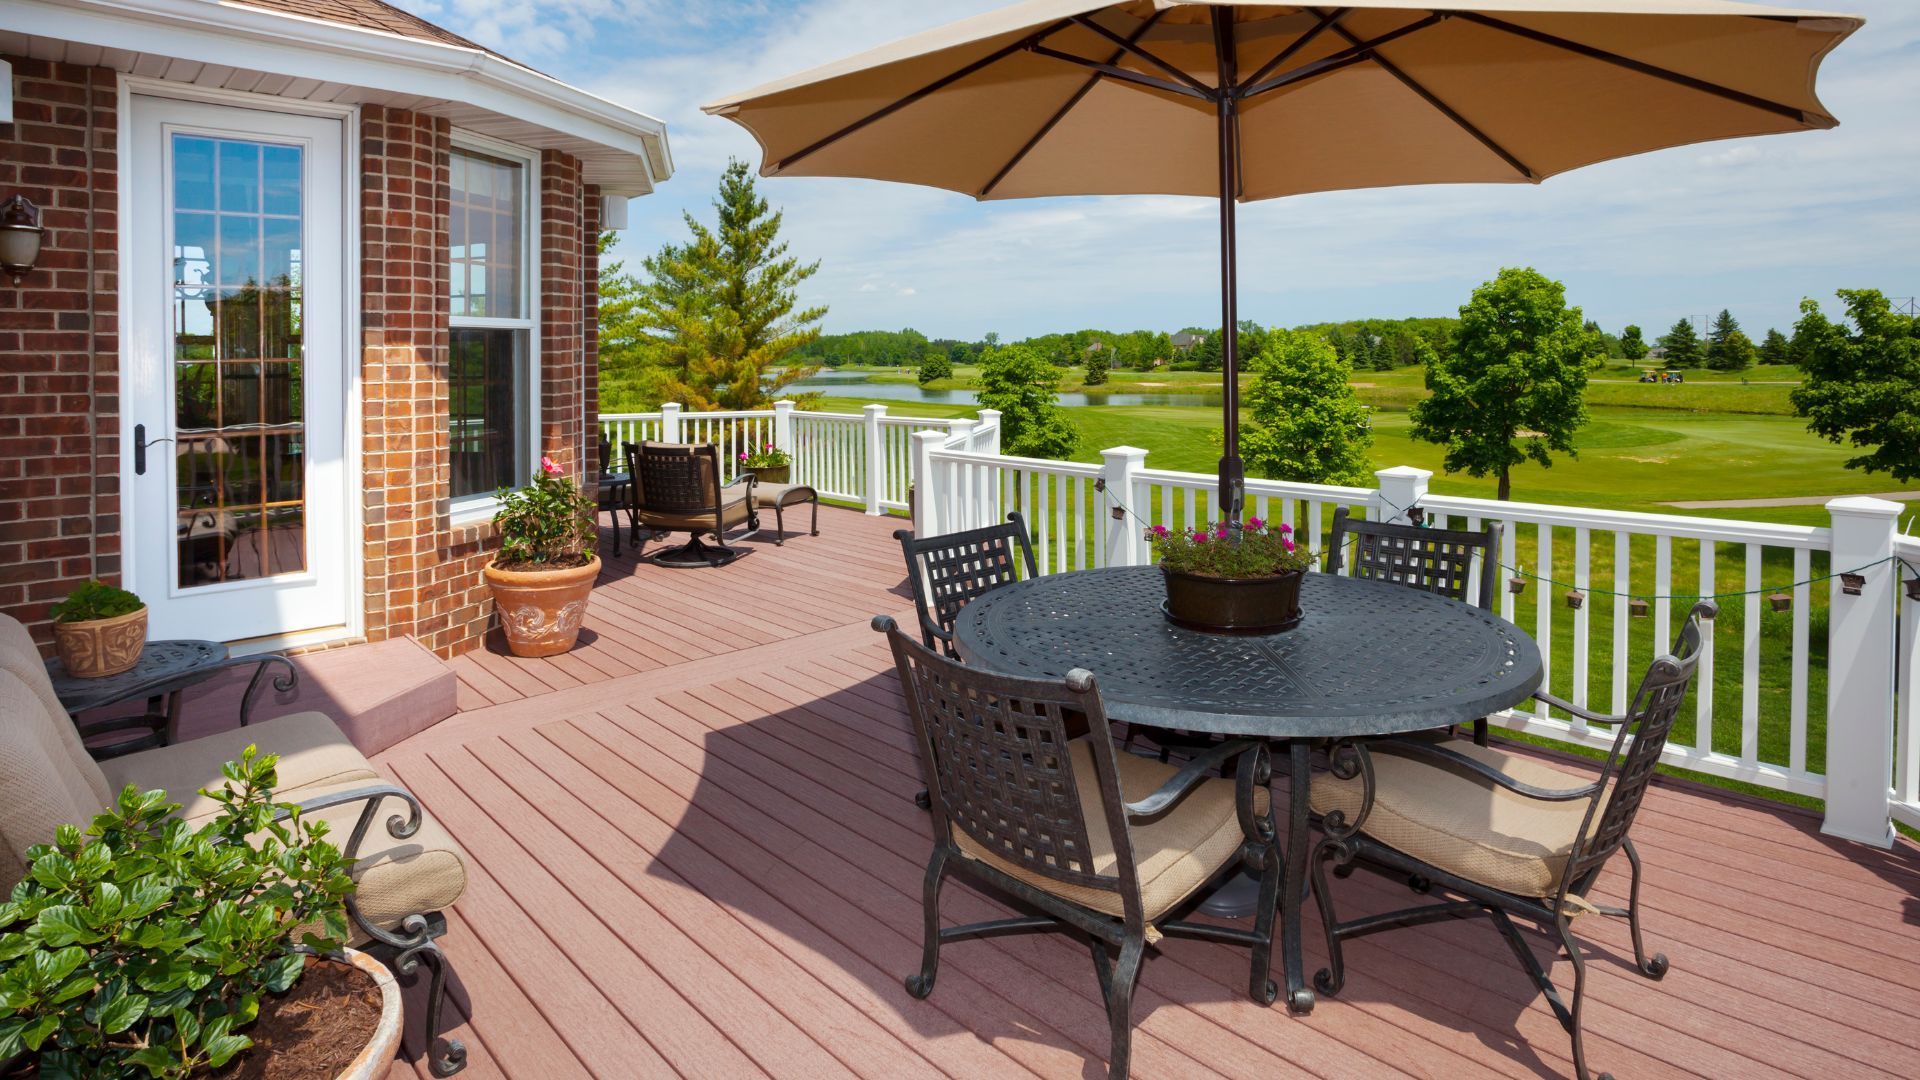 Inviting deck with outdoor seating overlooking a golf course in Athens, GA.